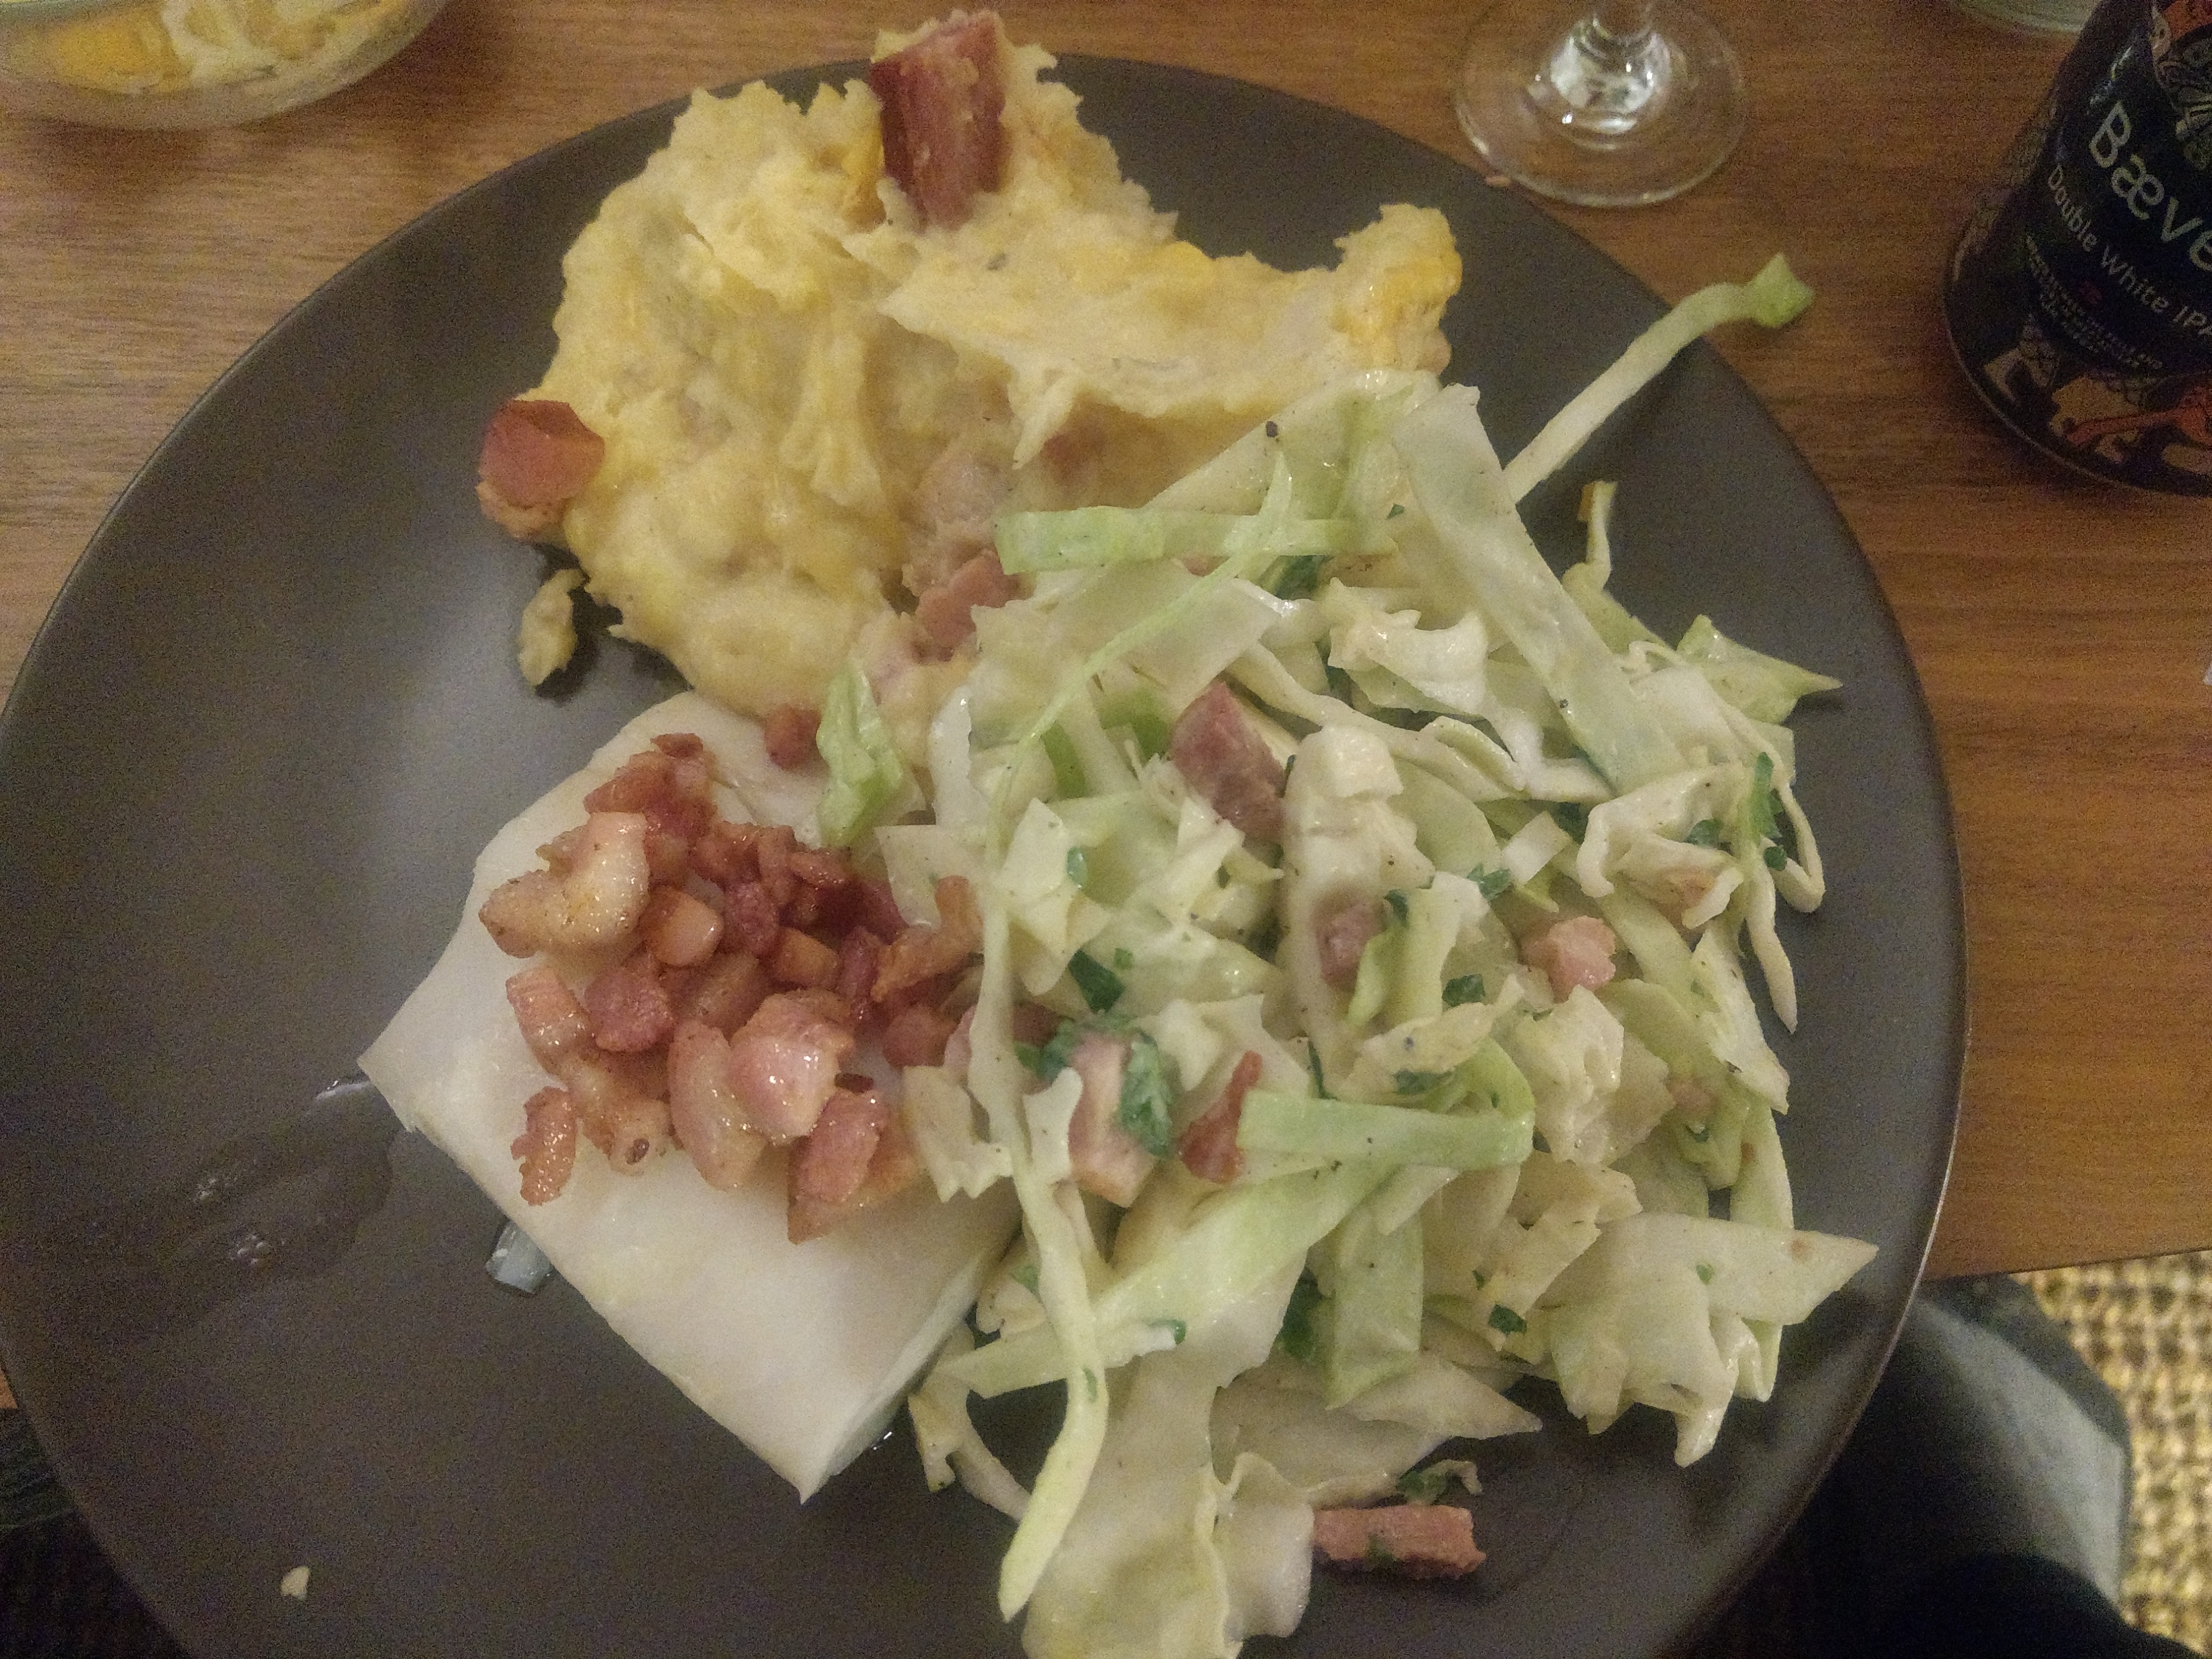 Sousvide cod with bacon, bacon and cheddar cheese mashed potatos and bacon coleslaw